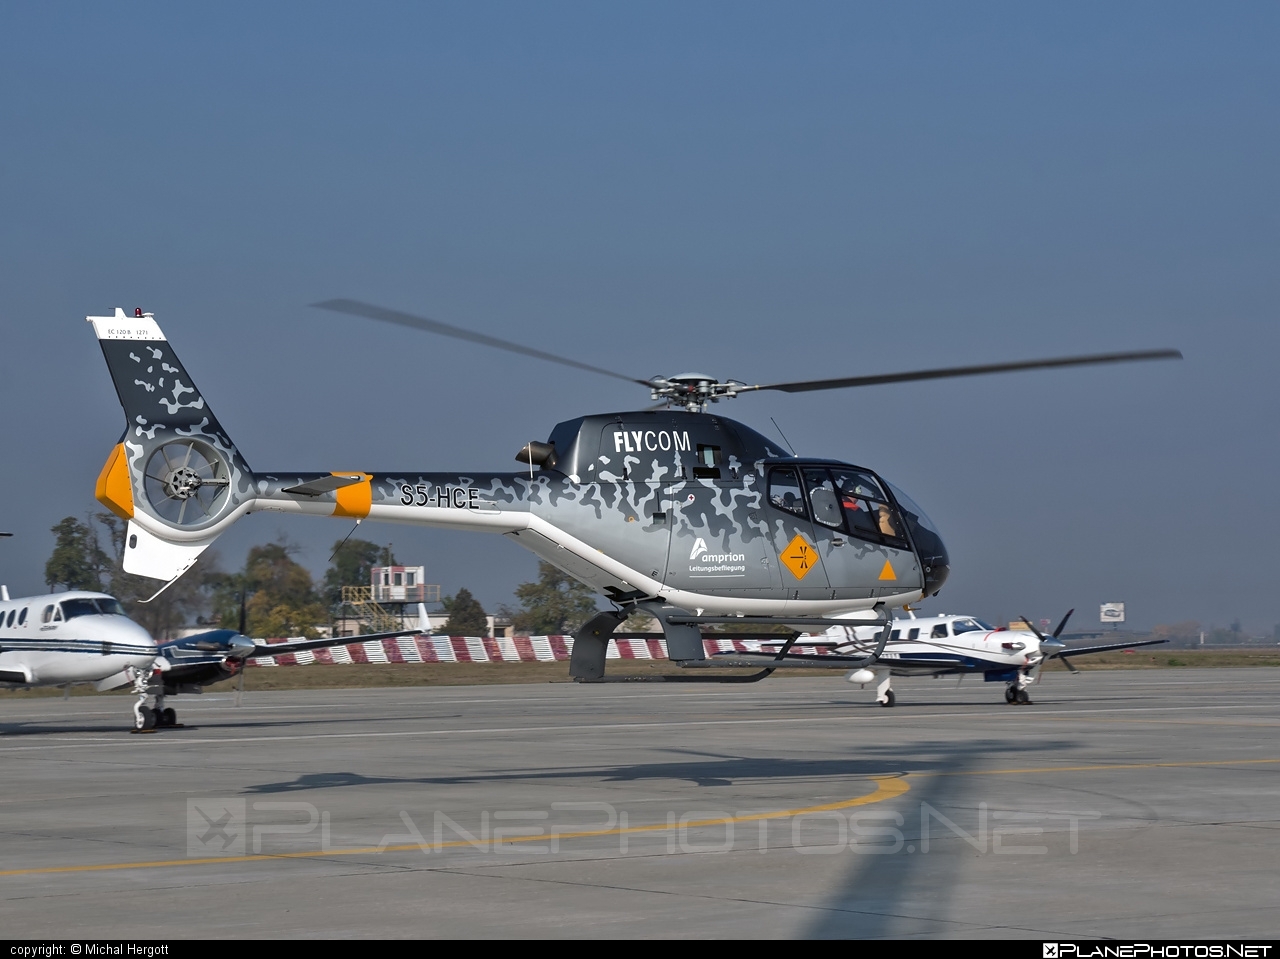 Eurocopter EC120 B Colibri - S5-HCE operated by Flycom #ec120 #ec120b #ec120bcolibri #ec120colibri #eurocopter #eurocoptercolibri #eurocopterec120colibri